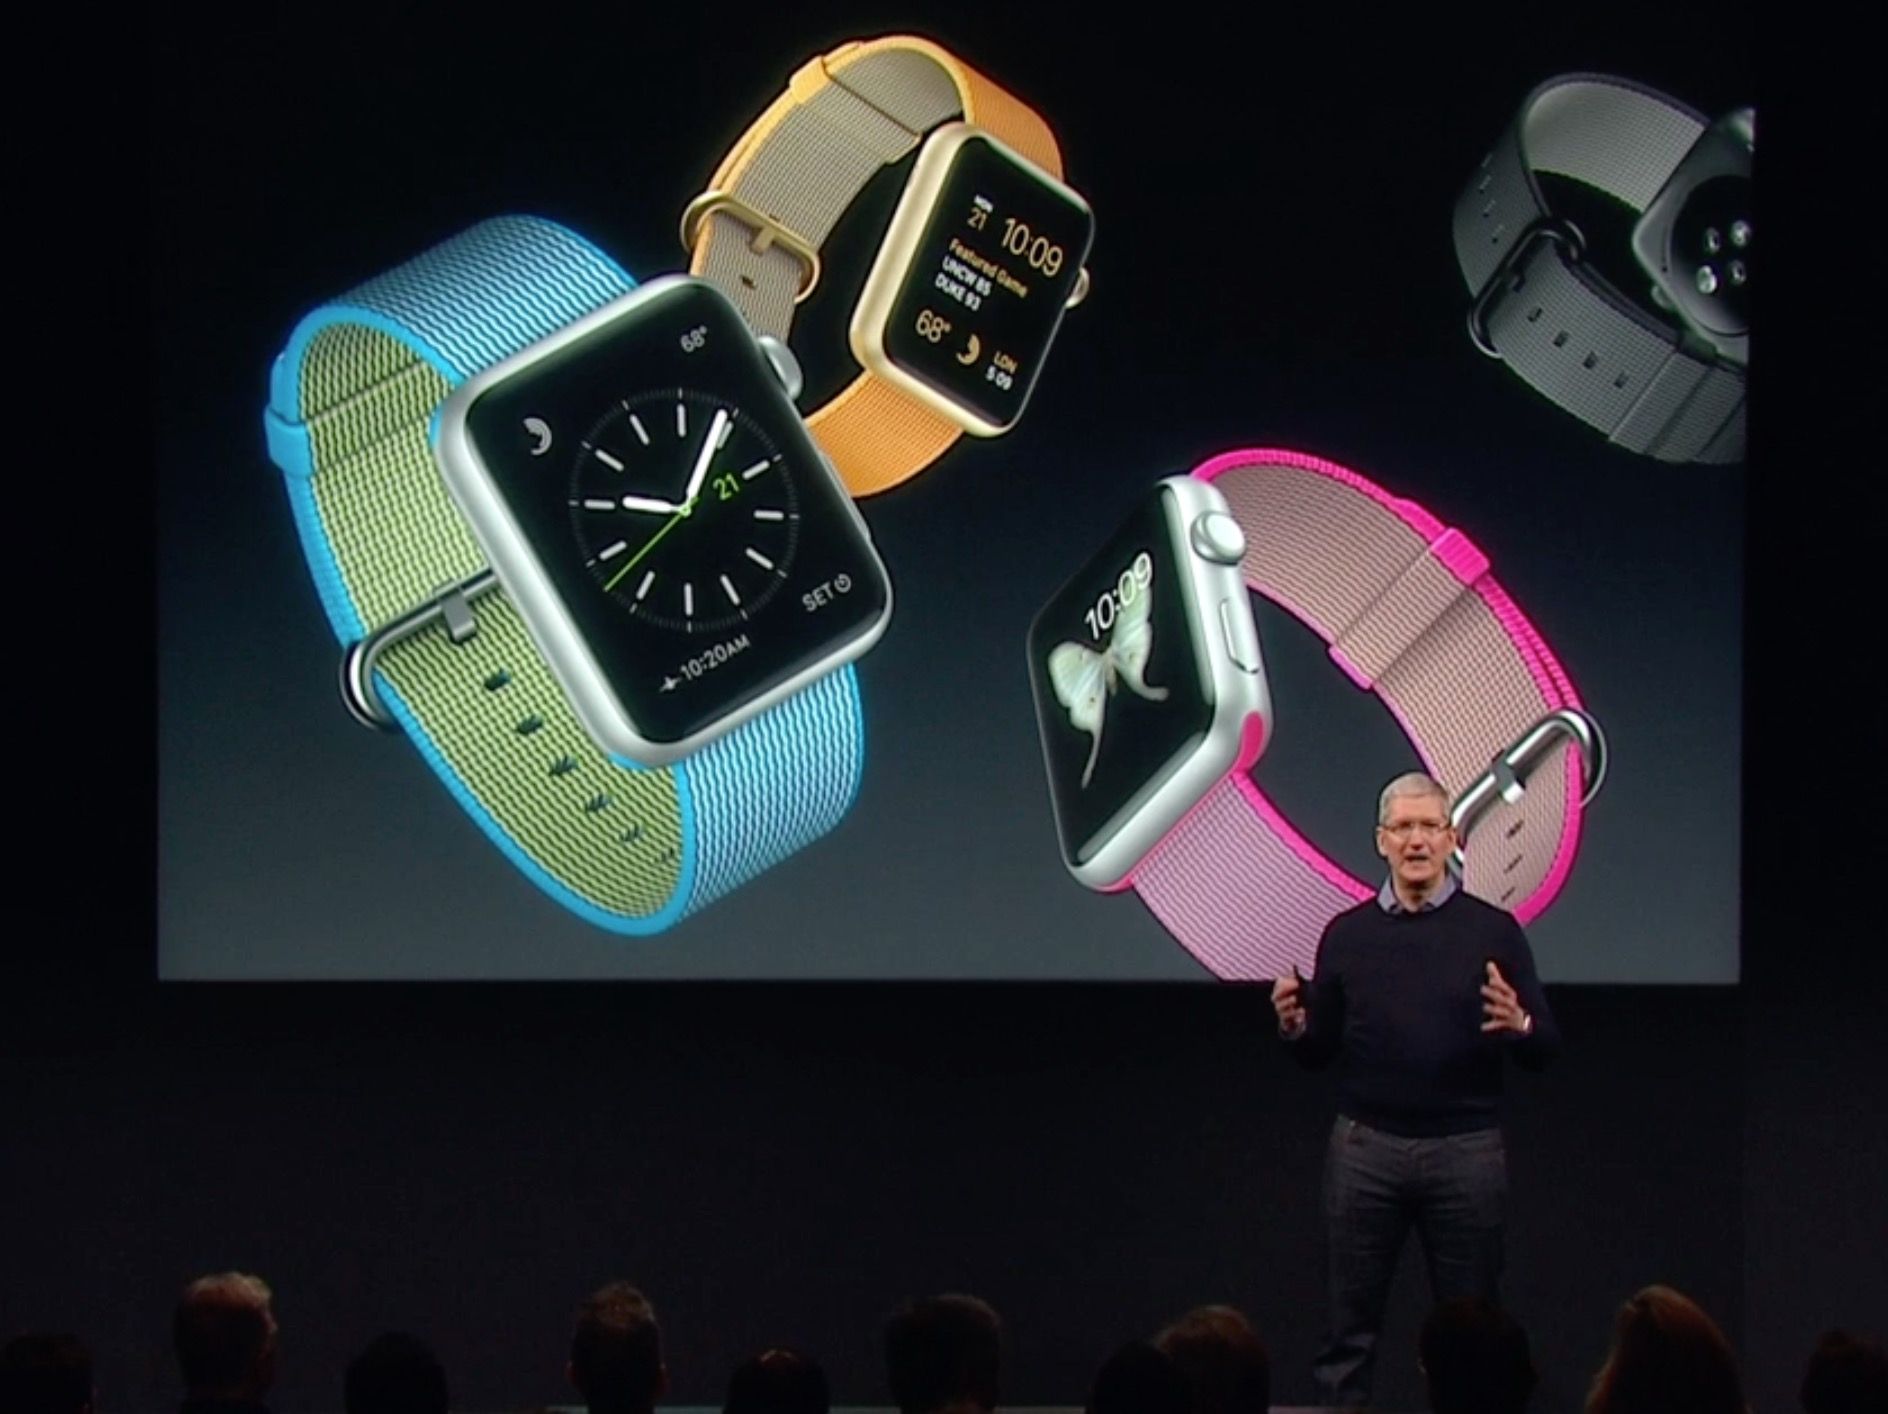 apple march event 9 headlines you probably missed image 1